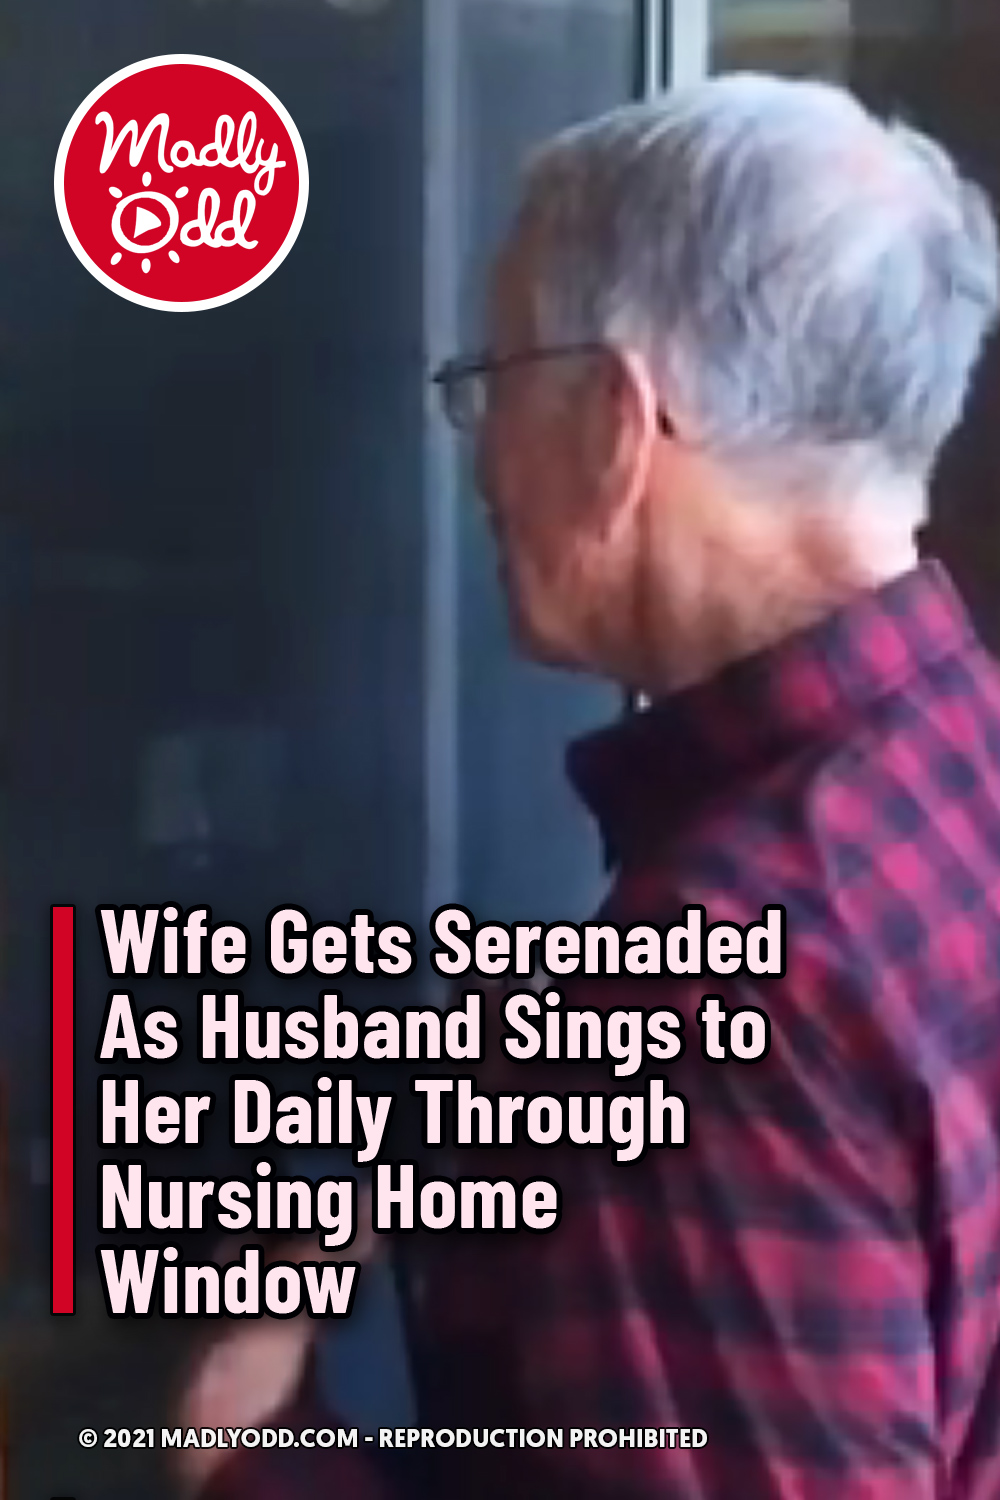 Wife Gets Serenaded As Husband Sings to Her Daily Through Nursing Home Window